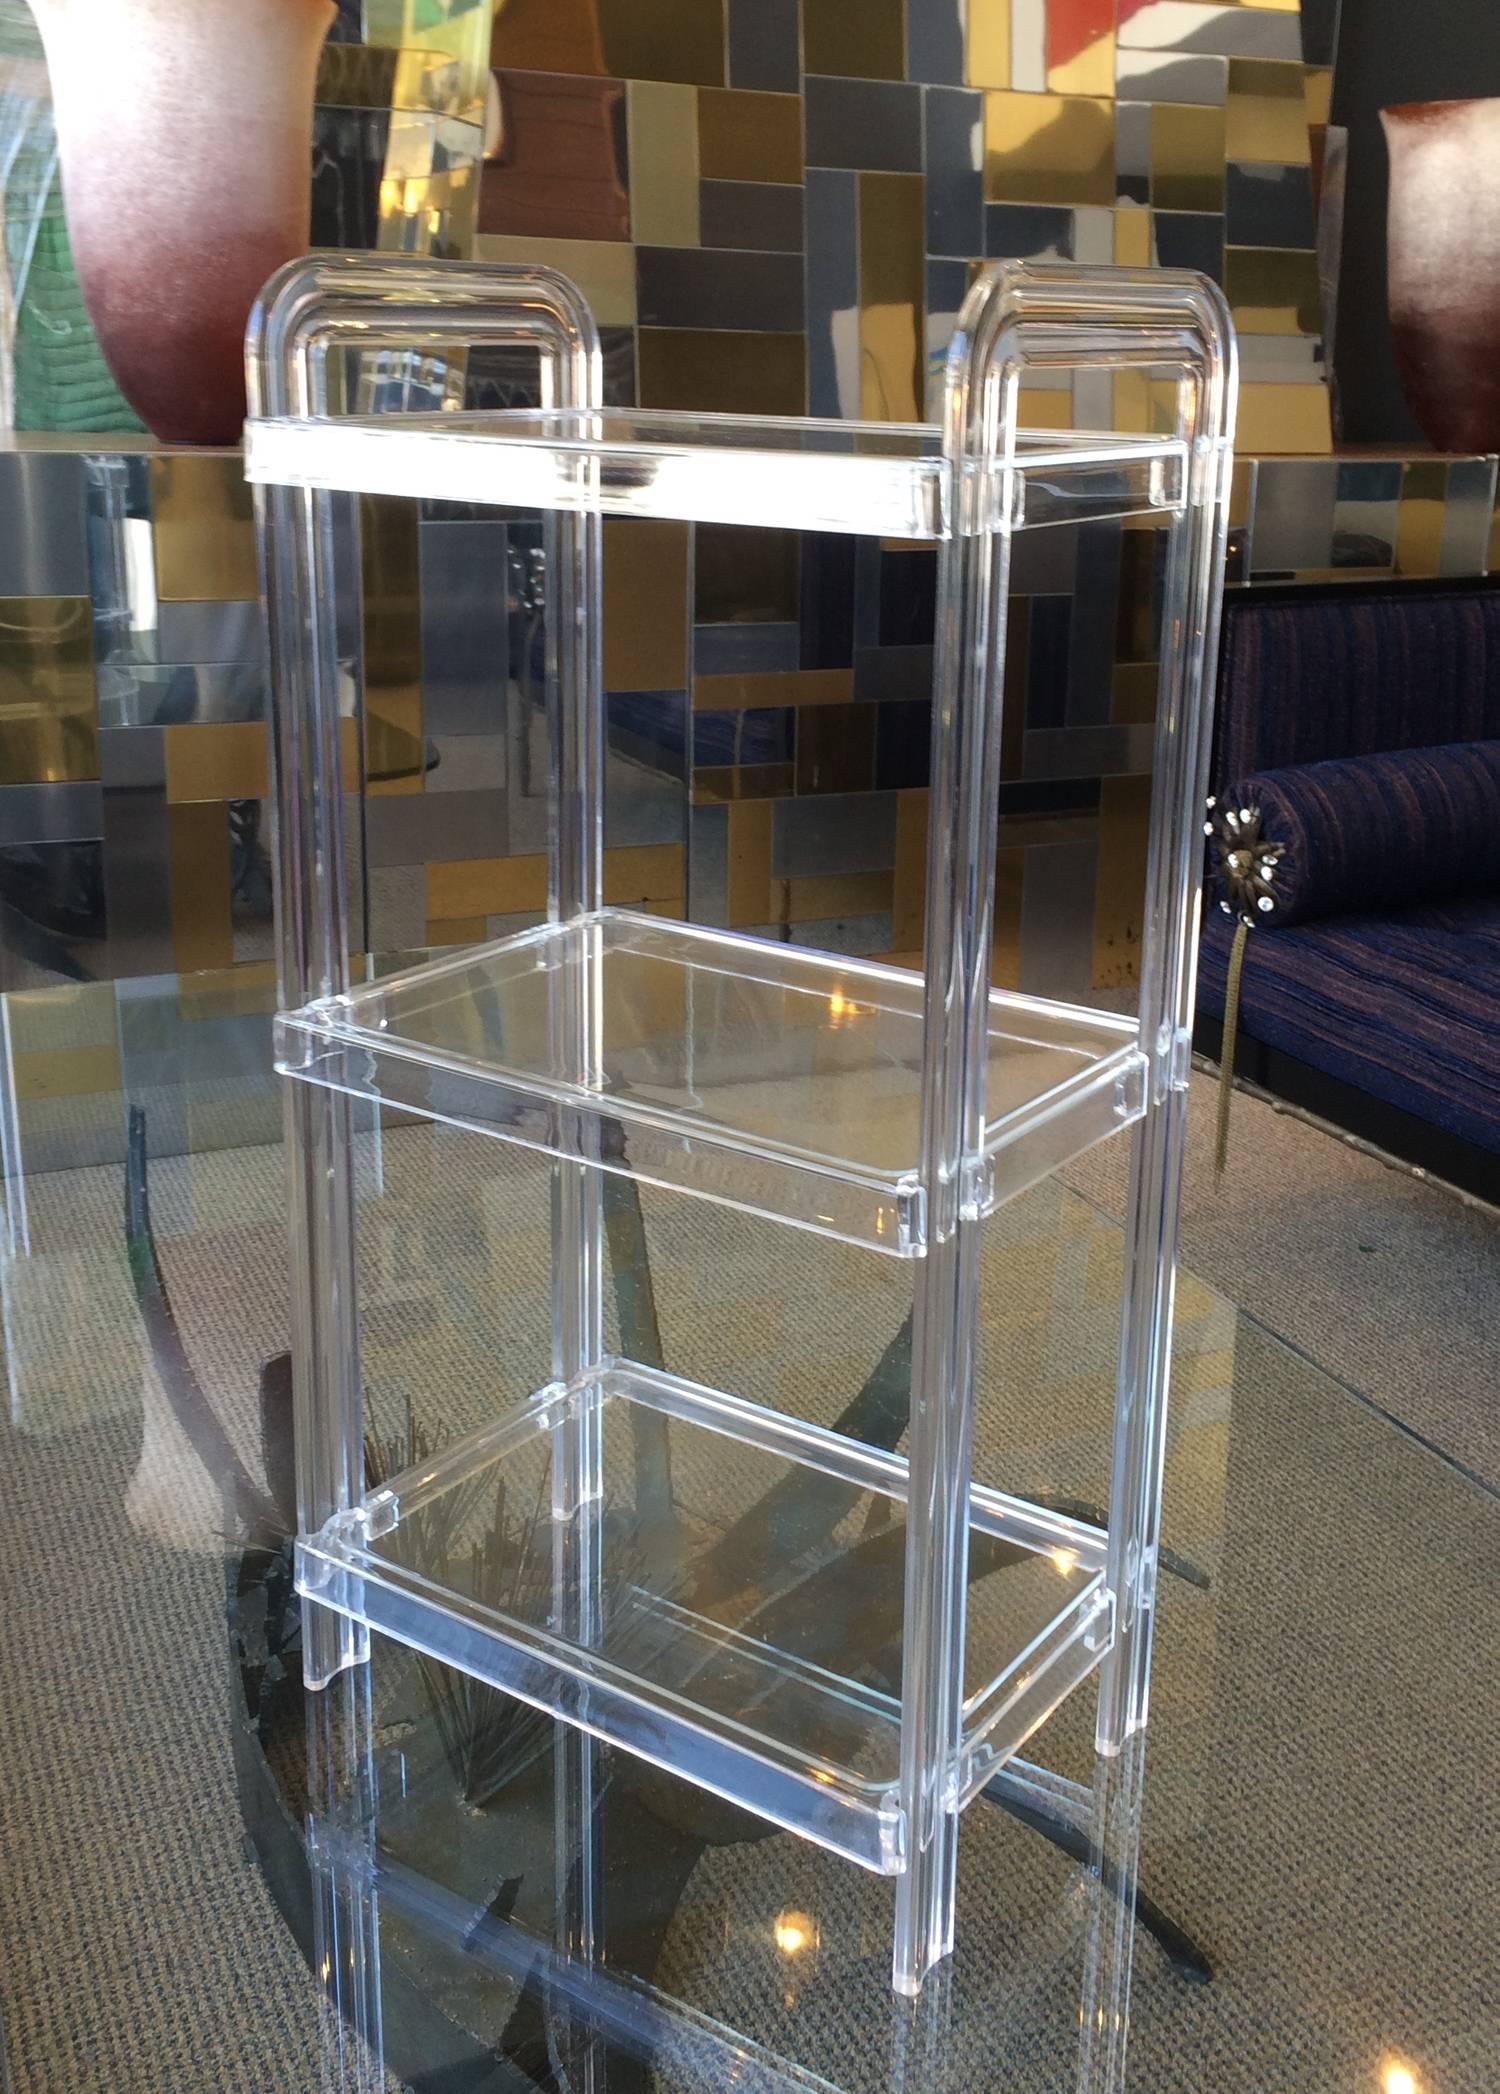 Beautiful three-tier Lucite vanity shelving unit with removable shelves.
The piece is in very good original condition and light in weight so that it can be moved easily.

Measurements:
28